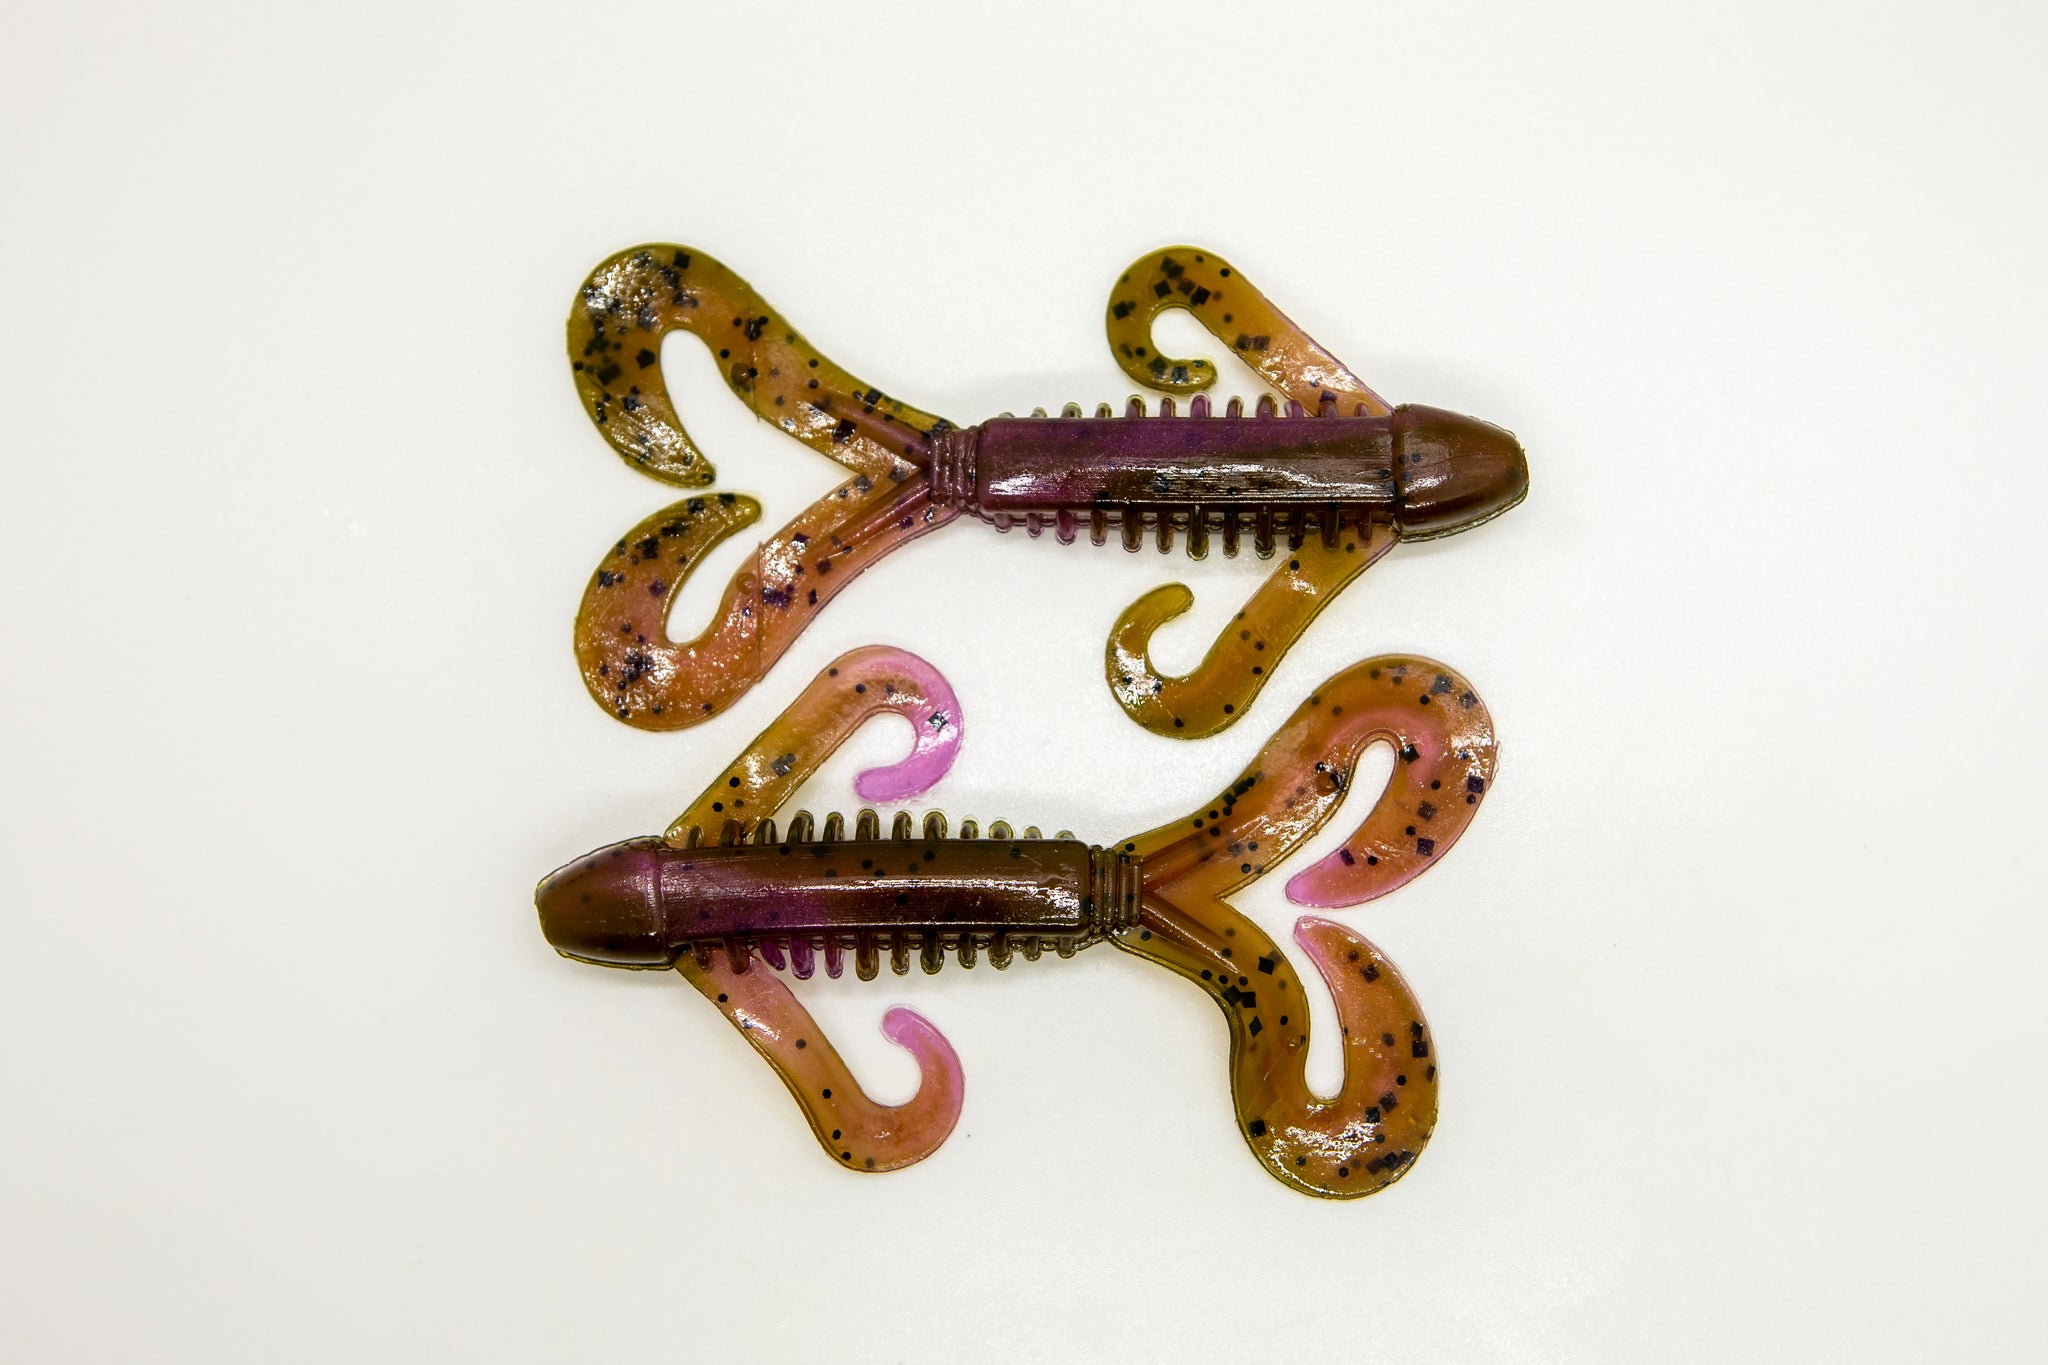 V&M Baits - Bloody Craw has been added in the J-Bug! Available Soon!  #vandmbaits #fishing #bassfishing